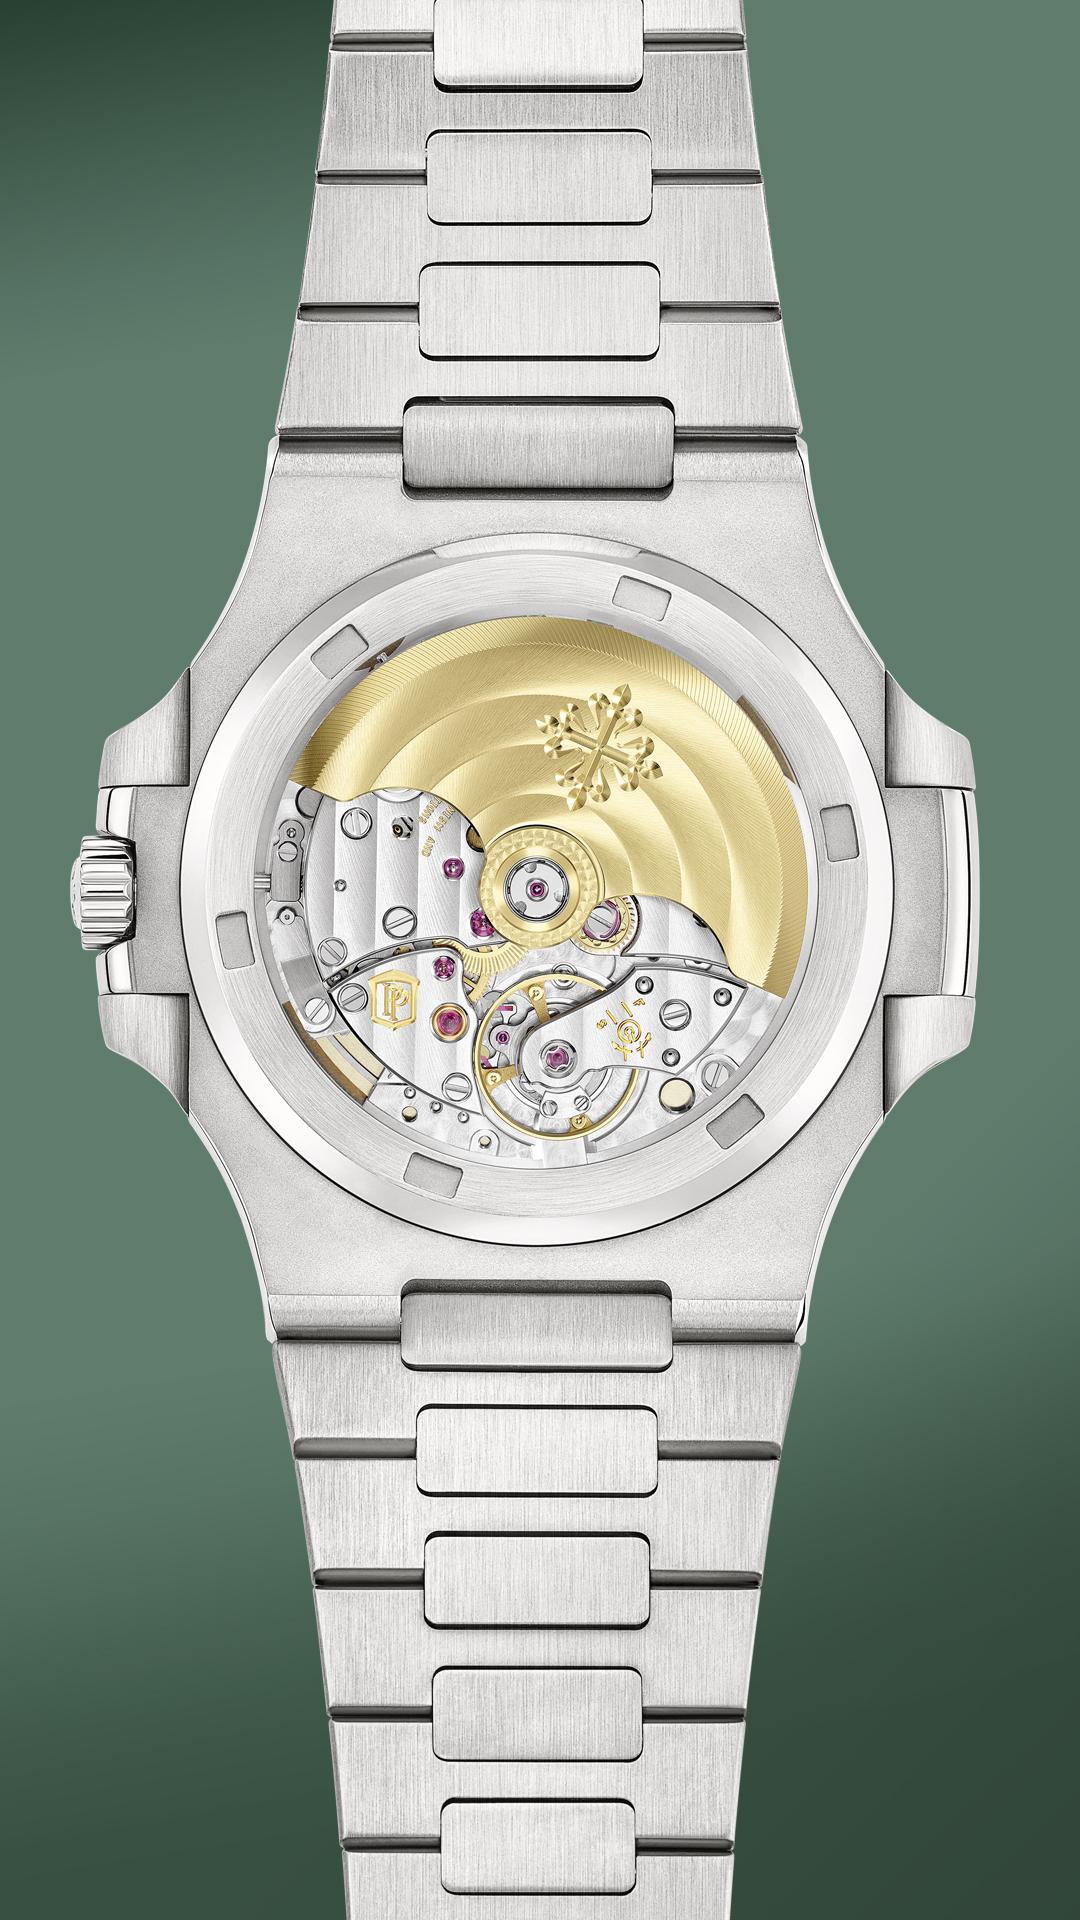 Patek Philippe's new Nautilus 5711/1A-014 replaces the most coveted watch  in the world